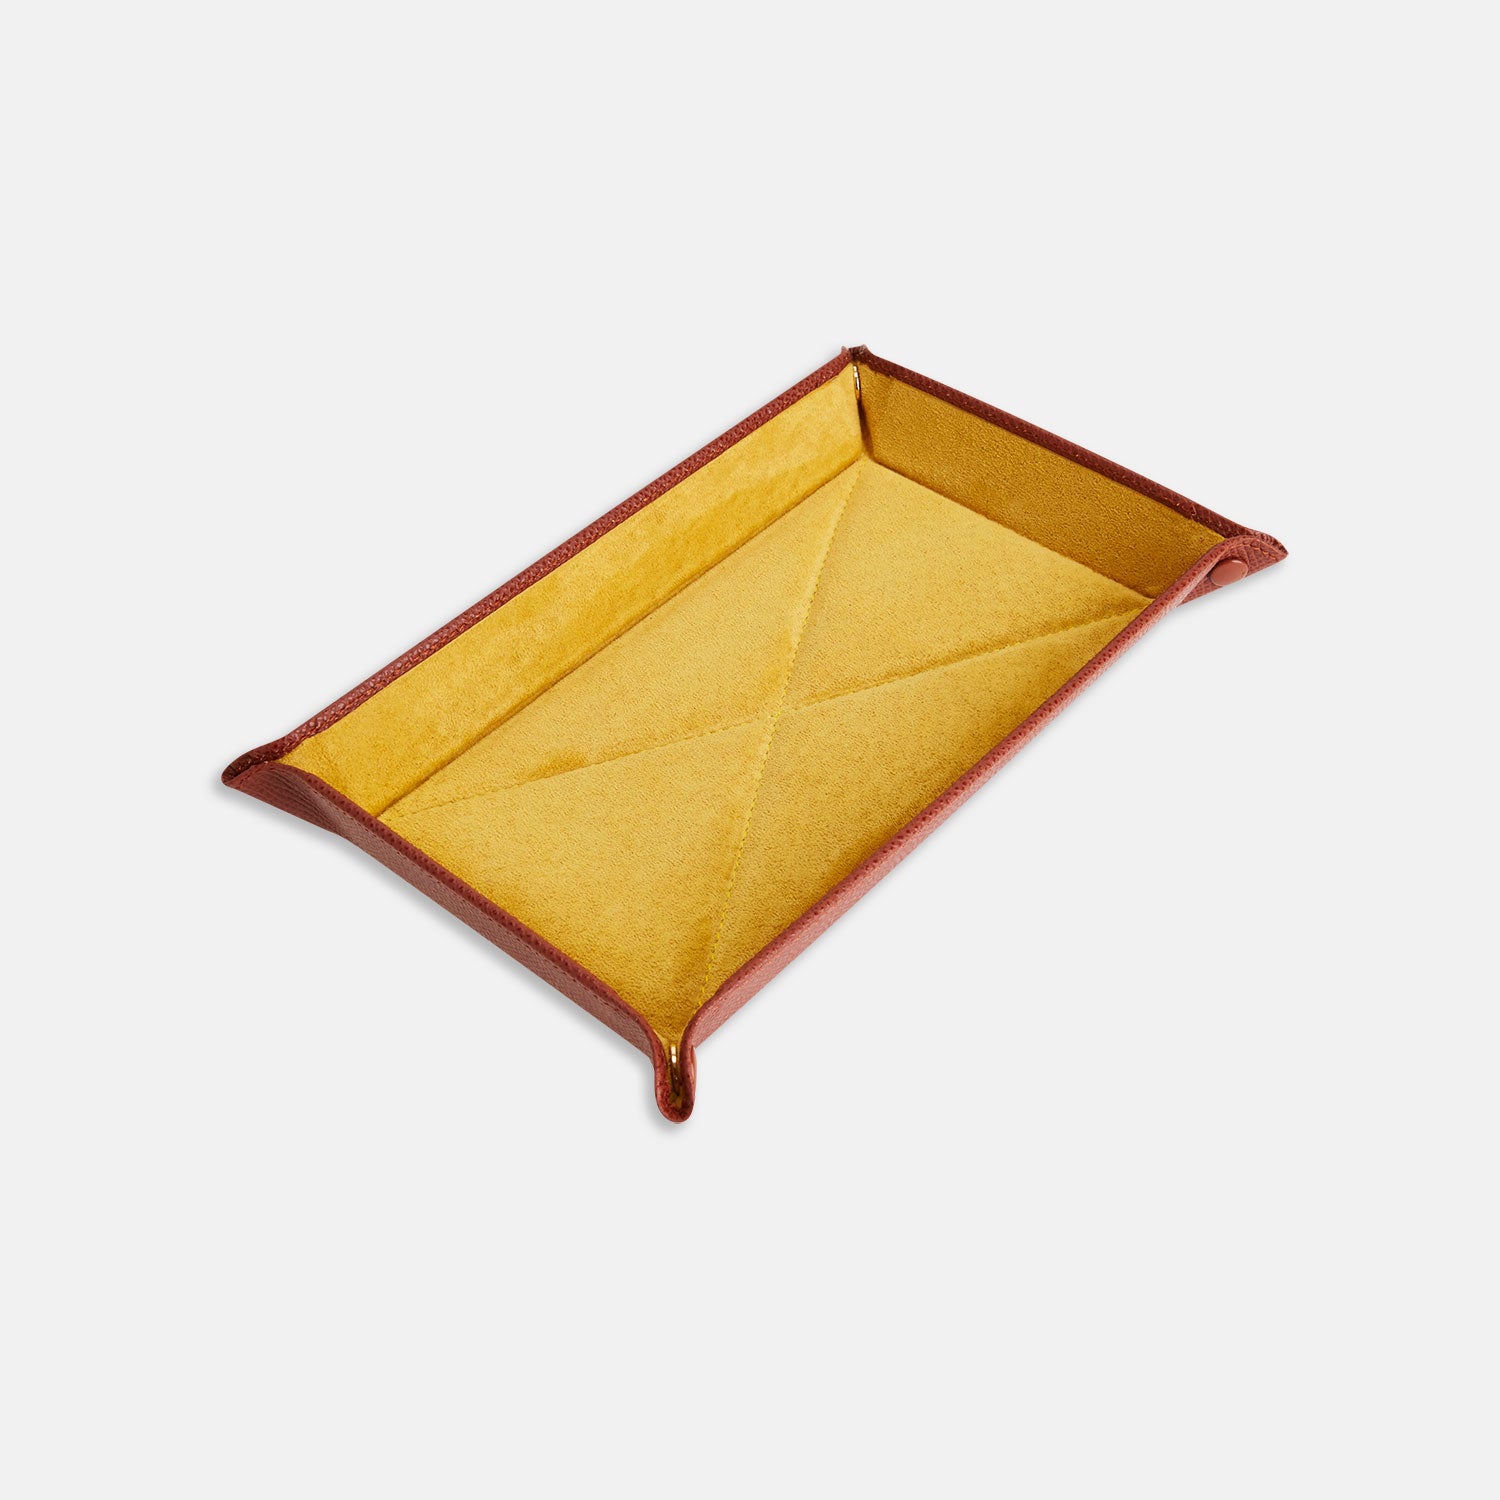 Brown and Yellow Rectangular Leather Travel Tray